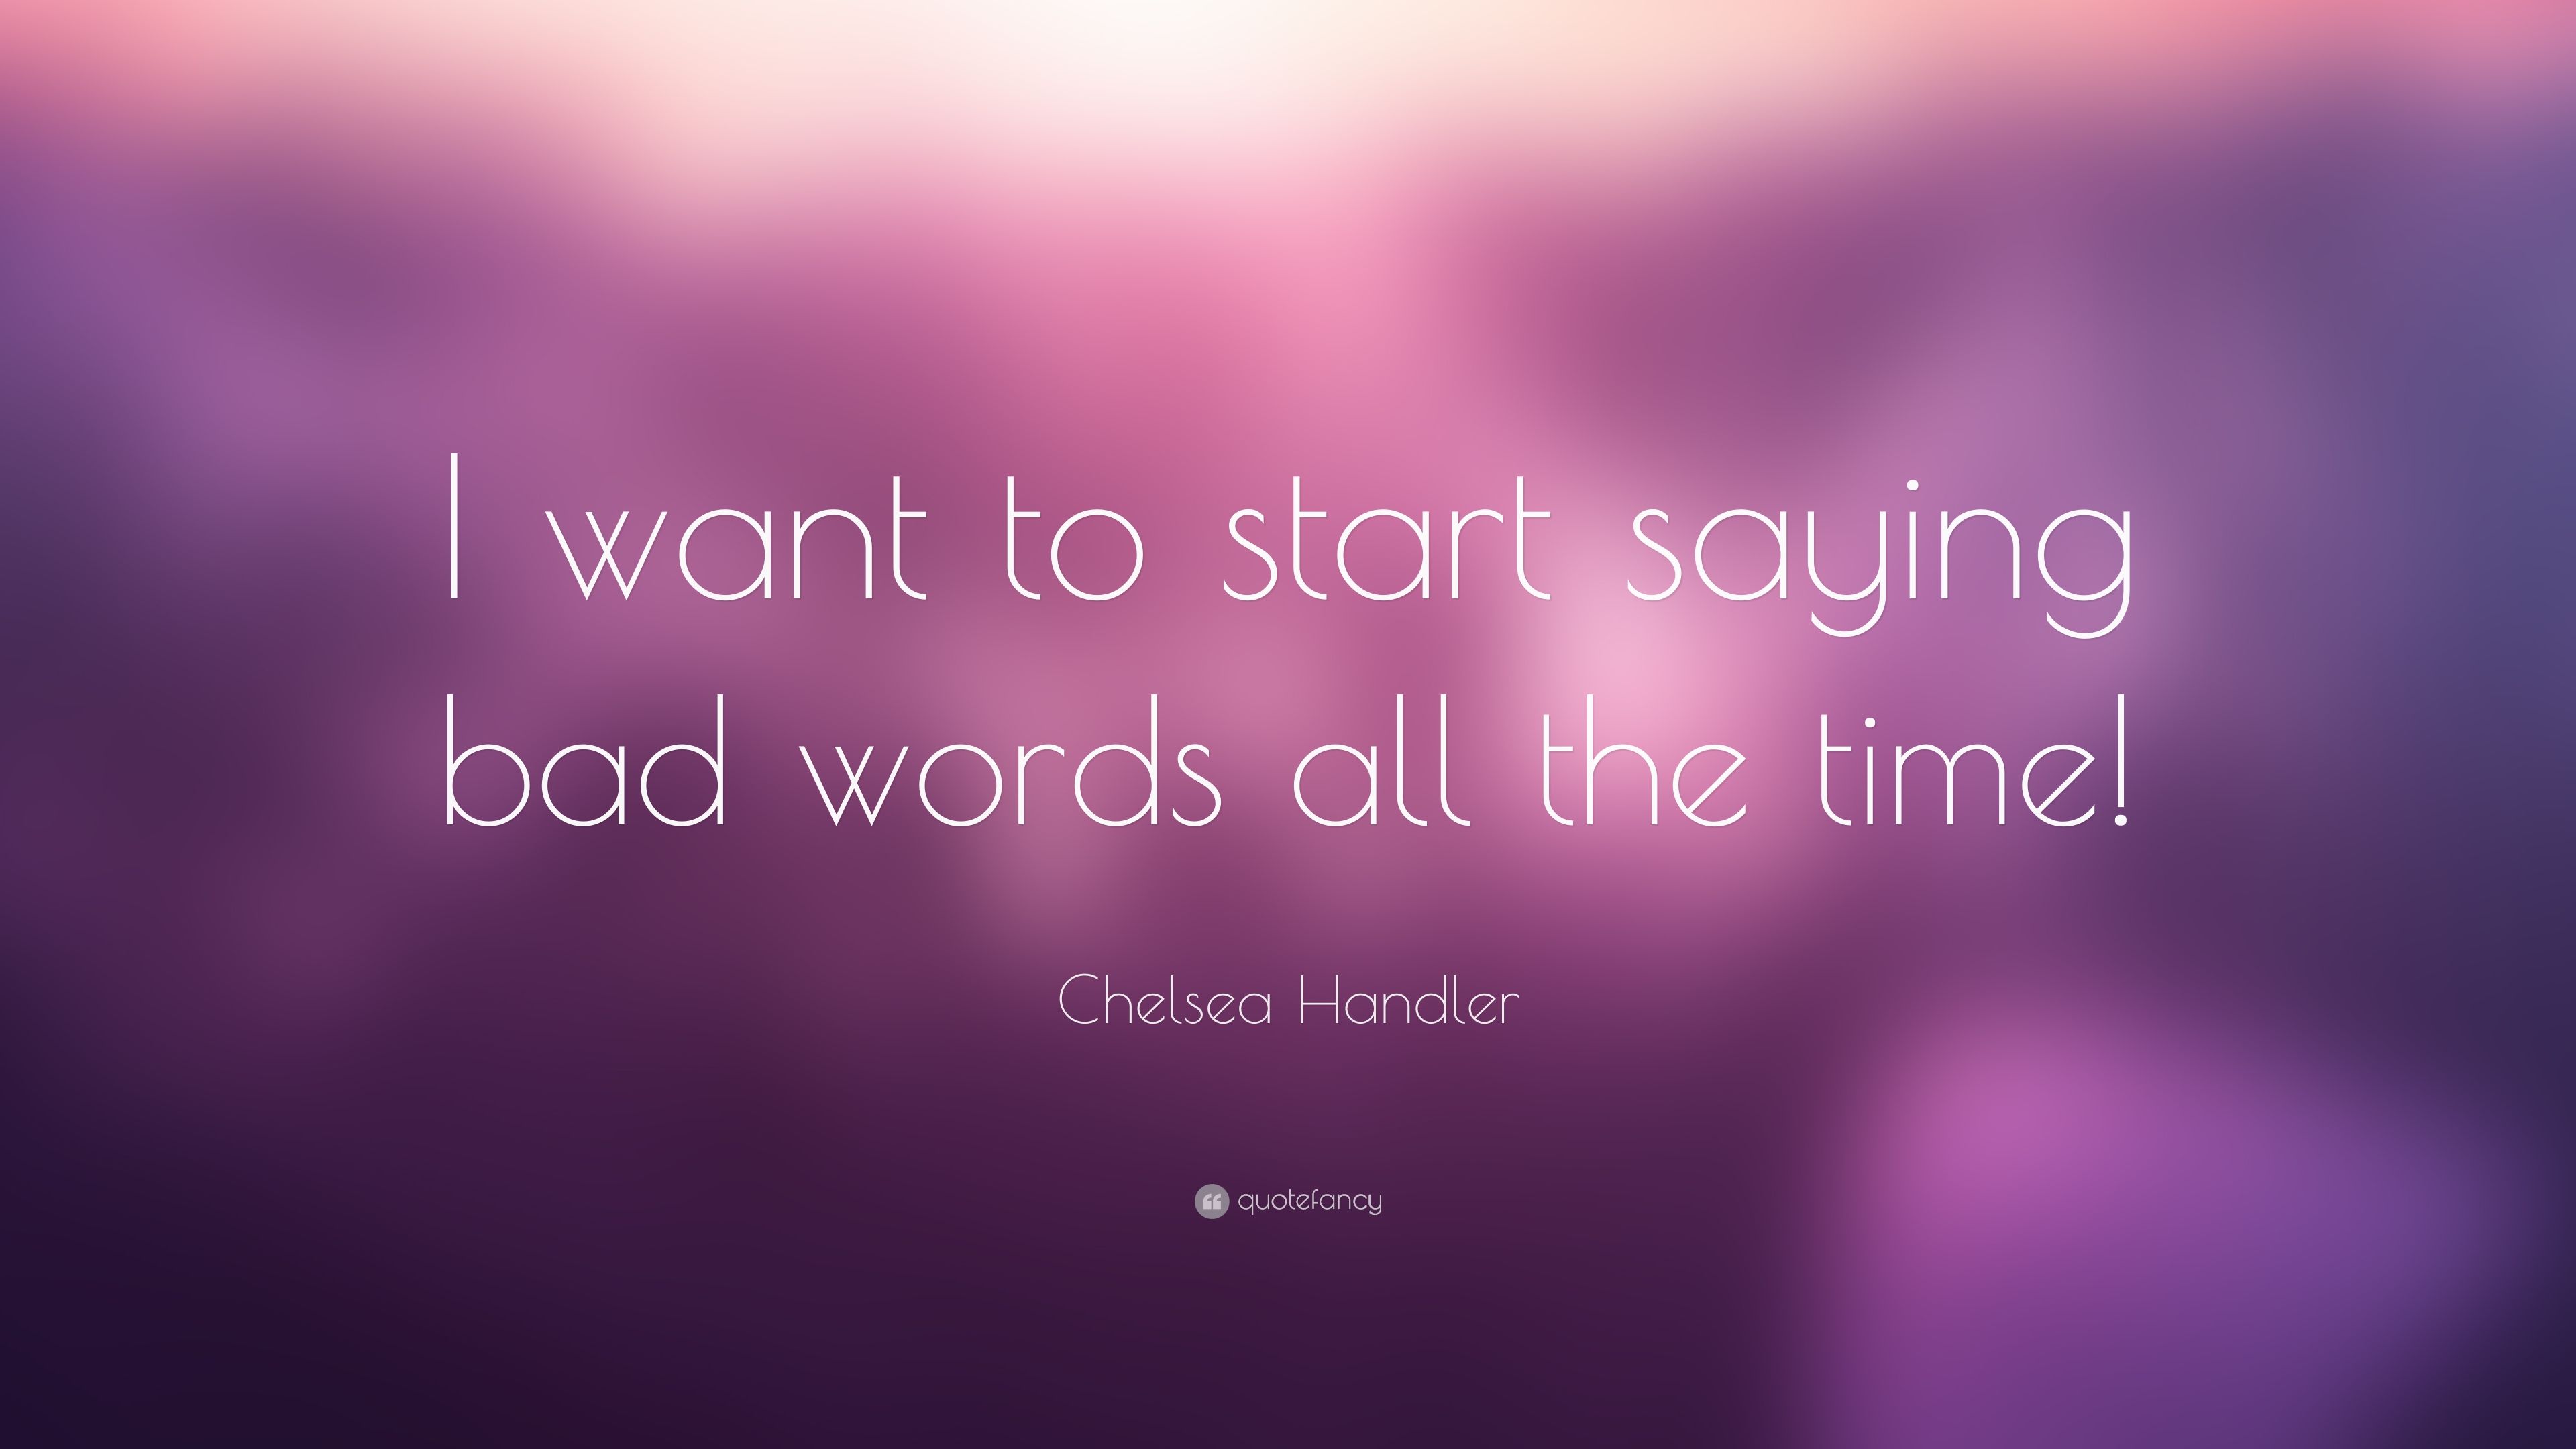 Chelsea Handler Quote: “I want to start saying bad words